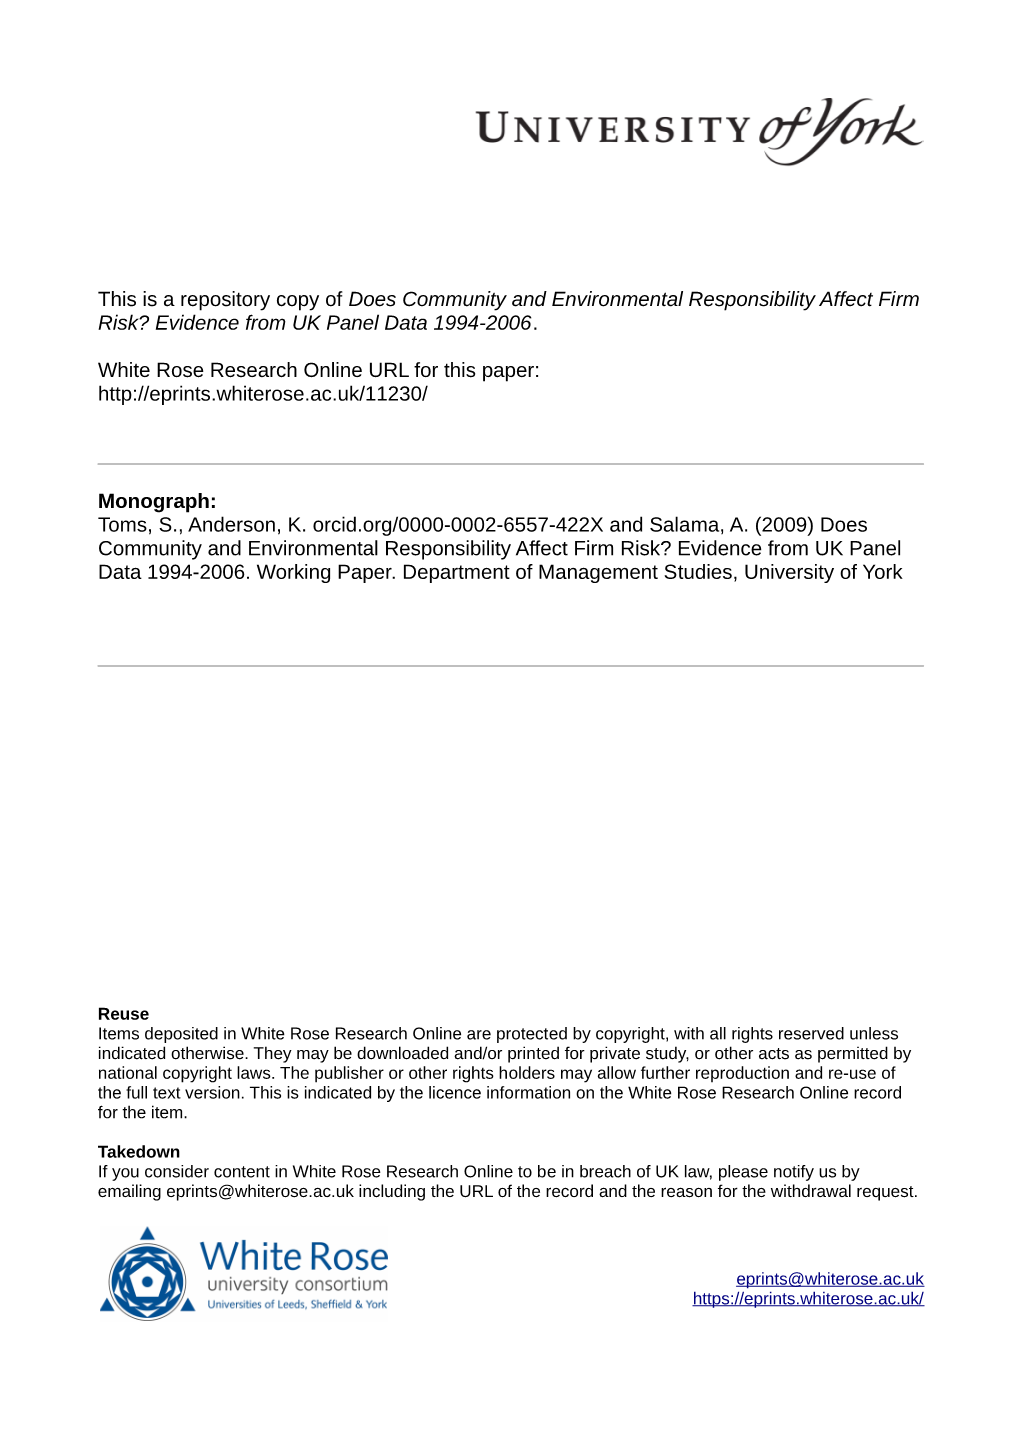 Does Community and Environmental Responsibility Affect Firm Risk? Evidence from UK Panel Data 1994-2006